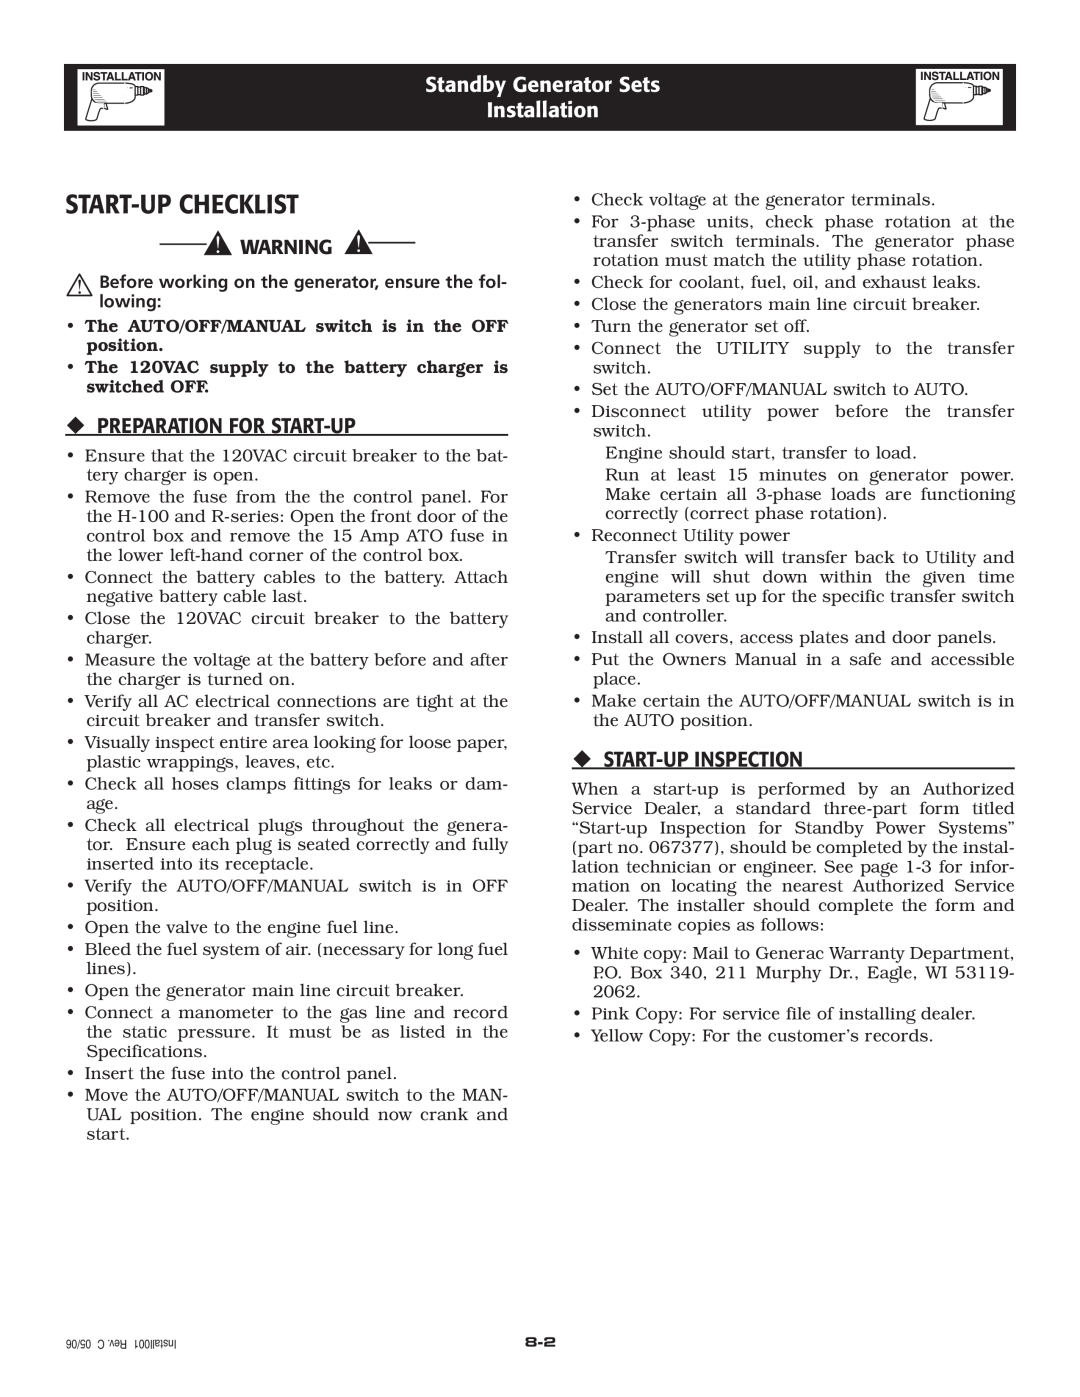 Generac Power Systems 005336-0, 005337-0 owner manual Start-Up Checklist, ‹ Preparation For Start-Up, ‹ Start-Up Inspection 